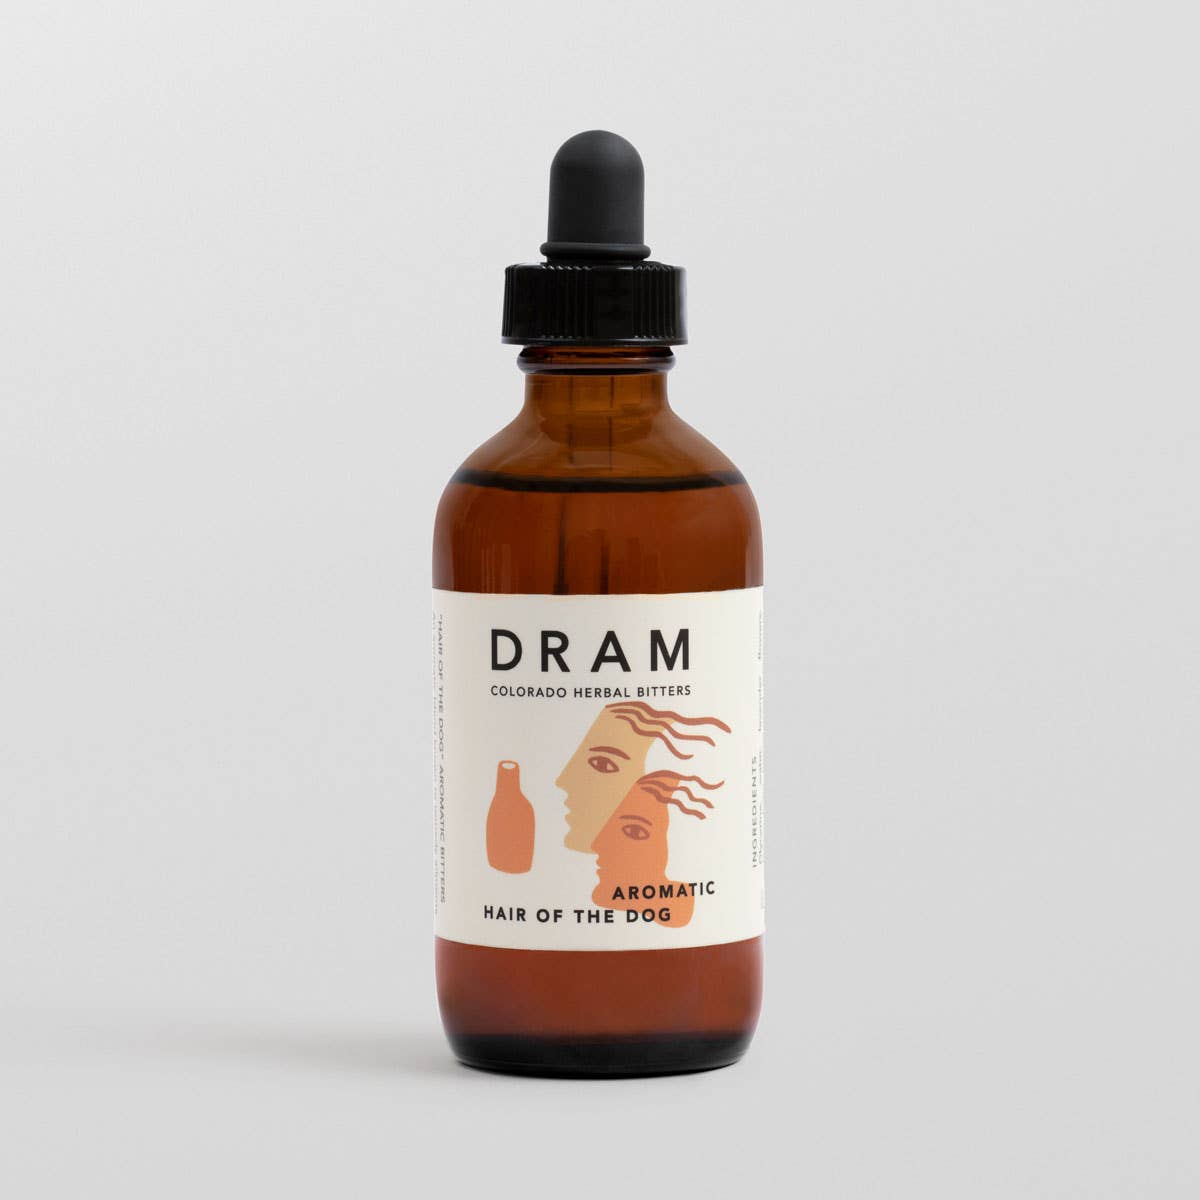 DRAM - "Hair of the Dog" Aromatic Bitters - ALCOHOL FREE